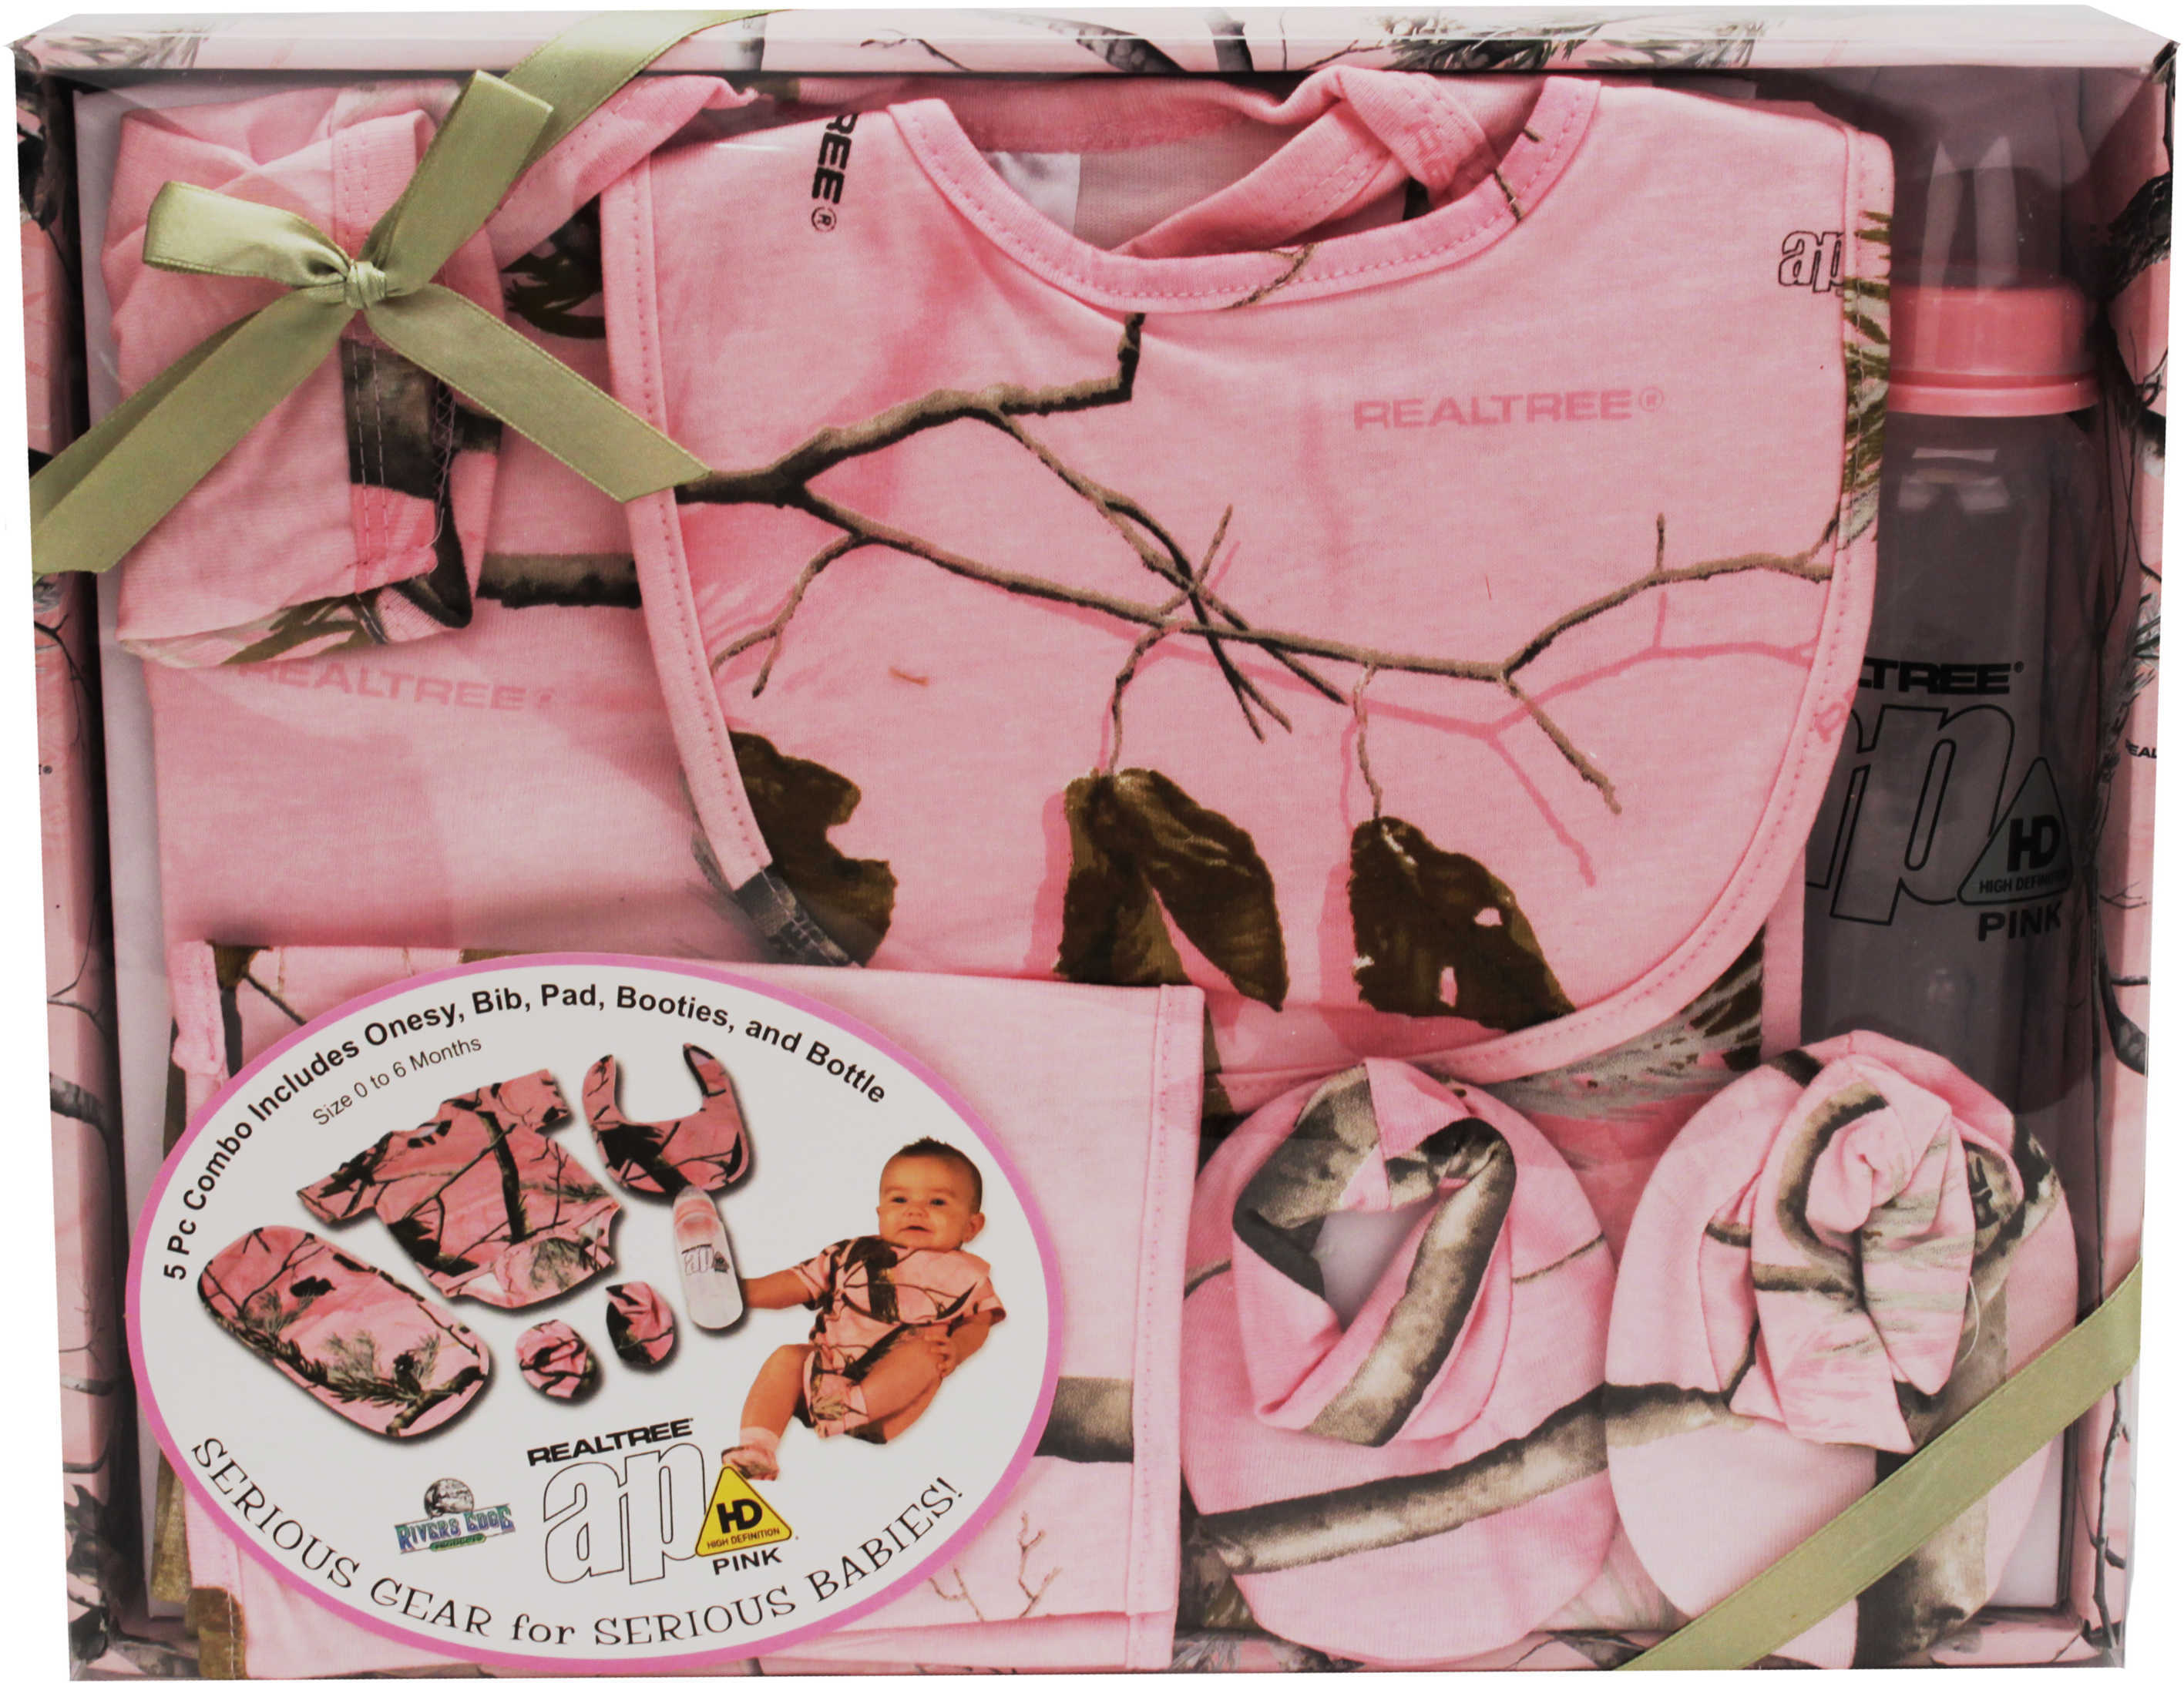 Rep Realtree Ap Hd Pink Baby Outfit